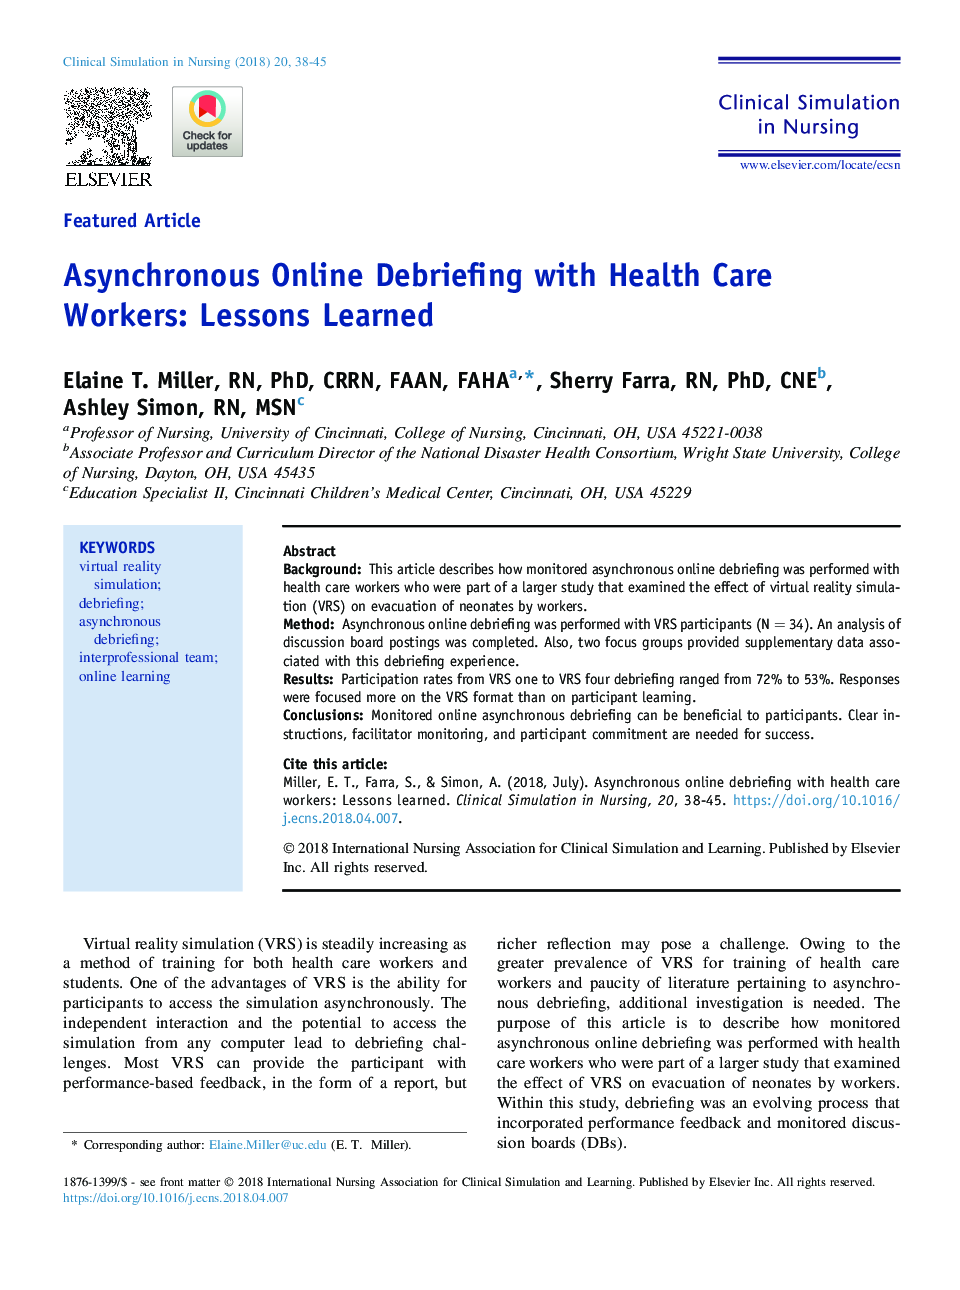 Asynchronous Online Debriefing with Health Care Workers: Lessons Learned